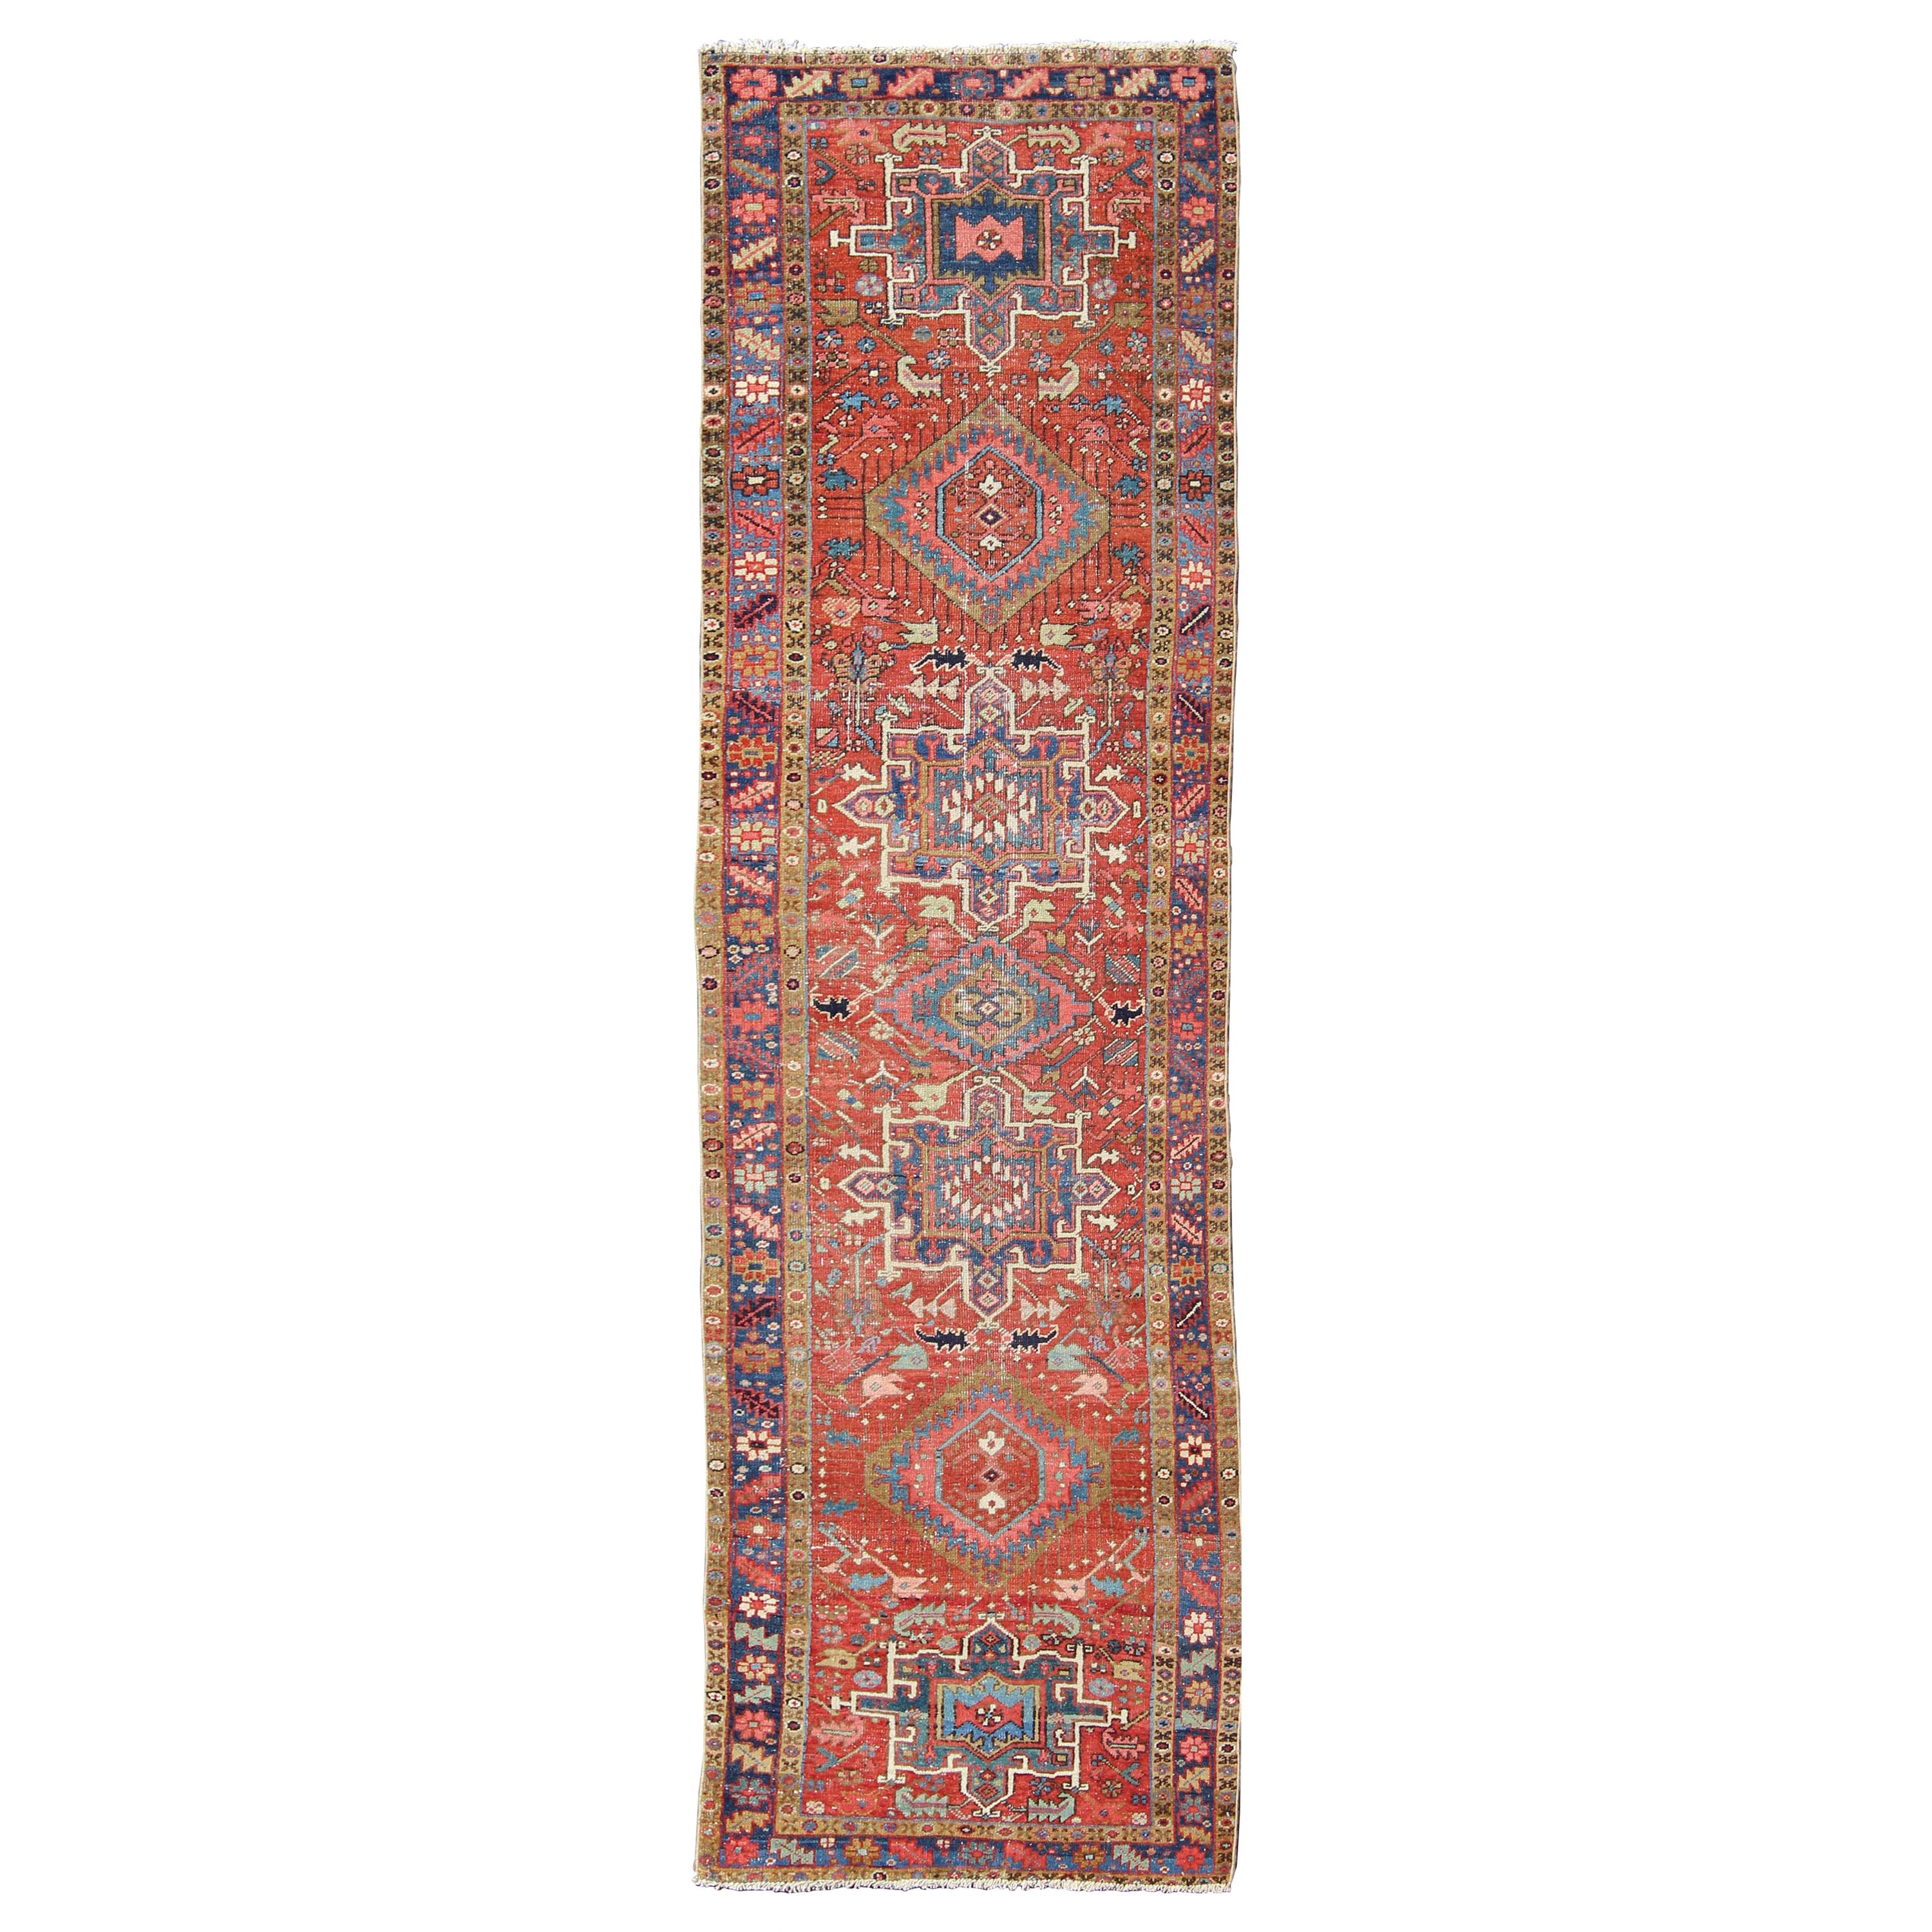 Geometric Medallion Antique Persian Heriz Runner in Brick Red and Blue